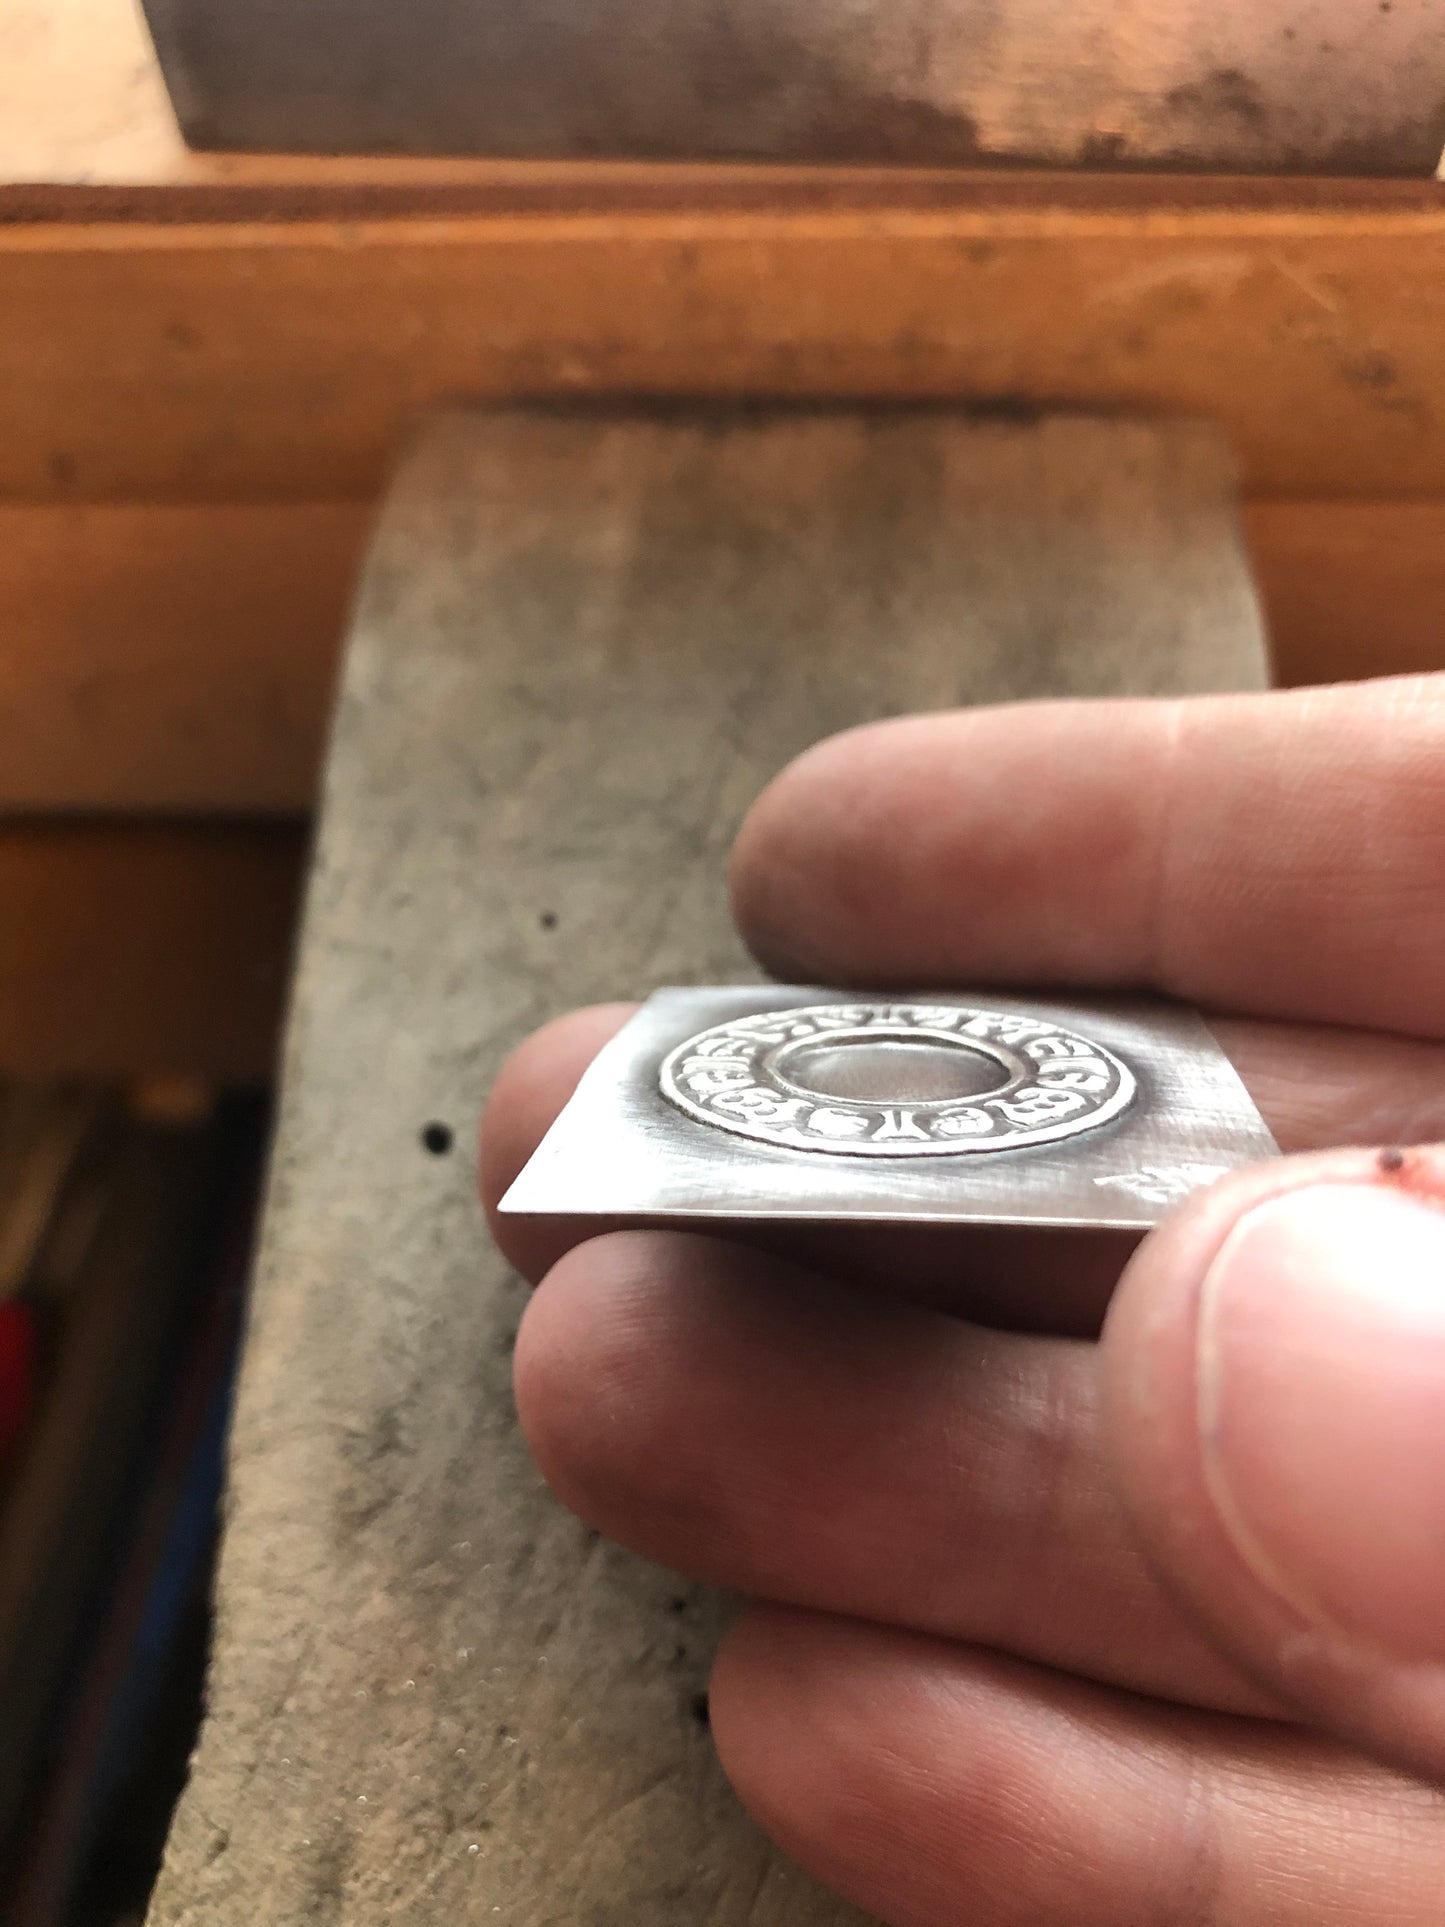 Pressed Metal Ring of Symbols Impression for Jewelry Making